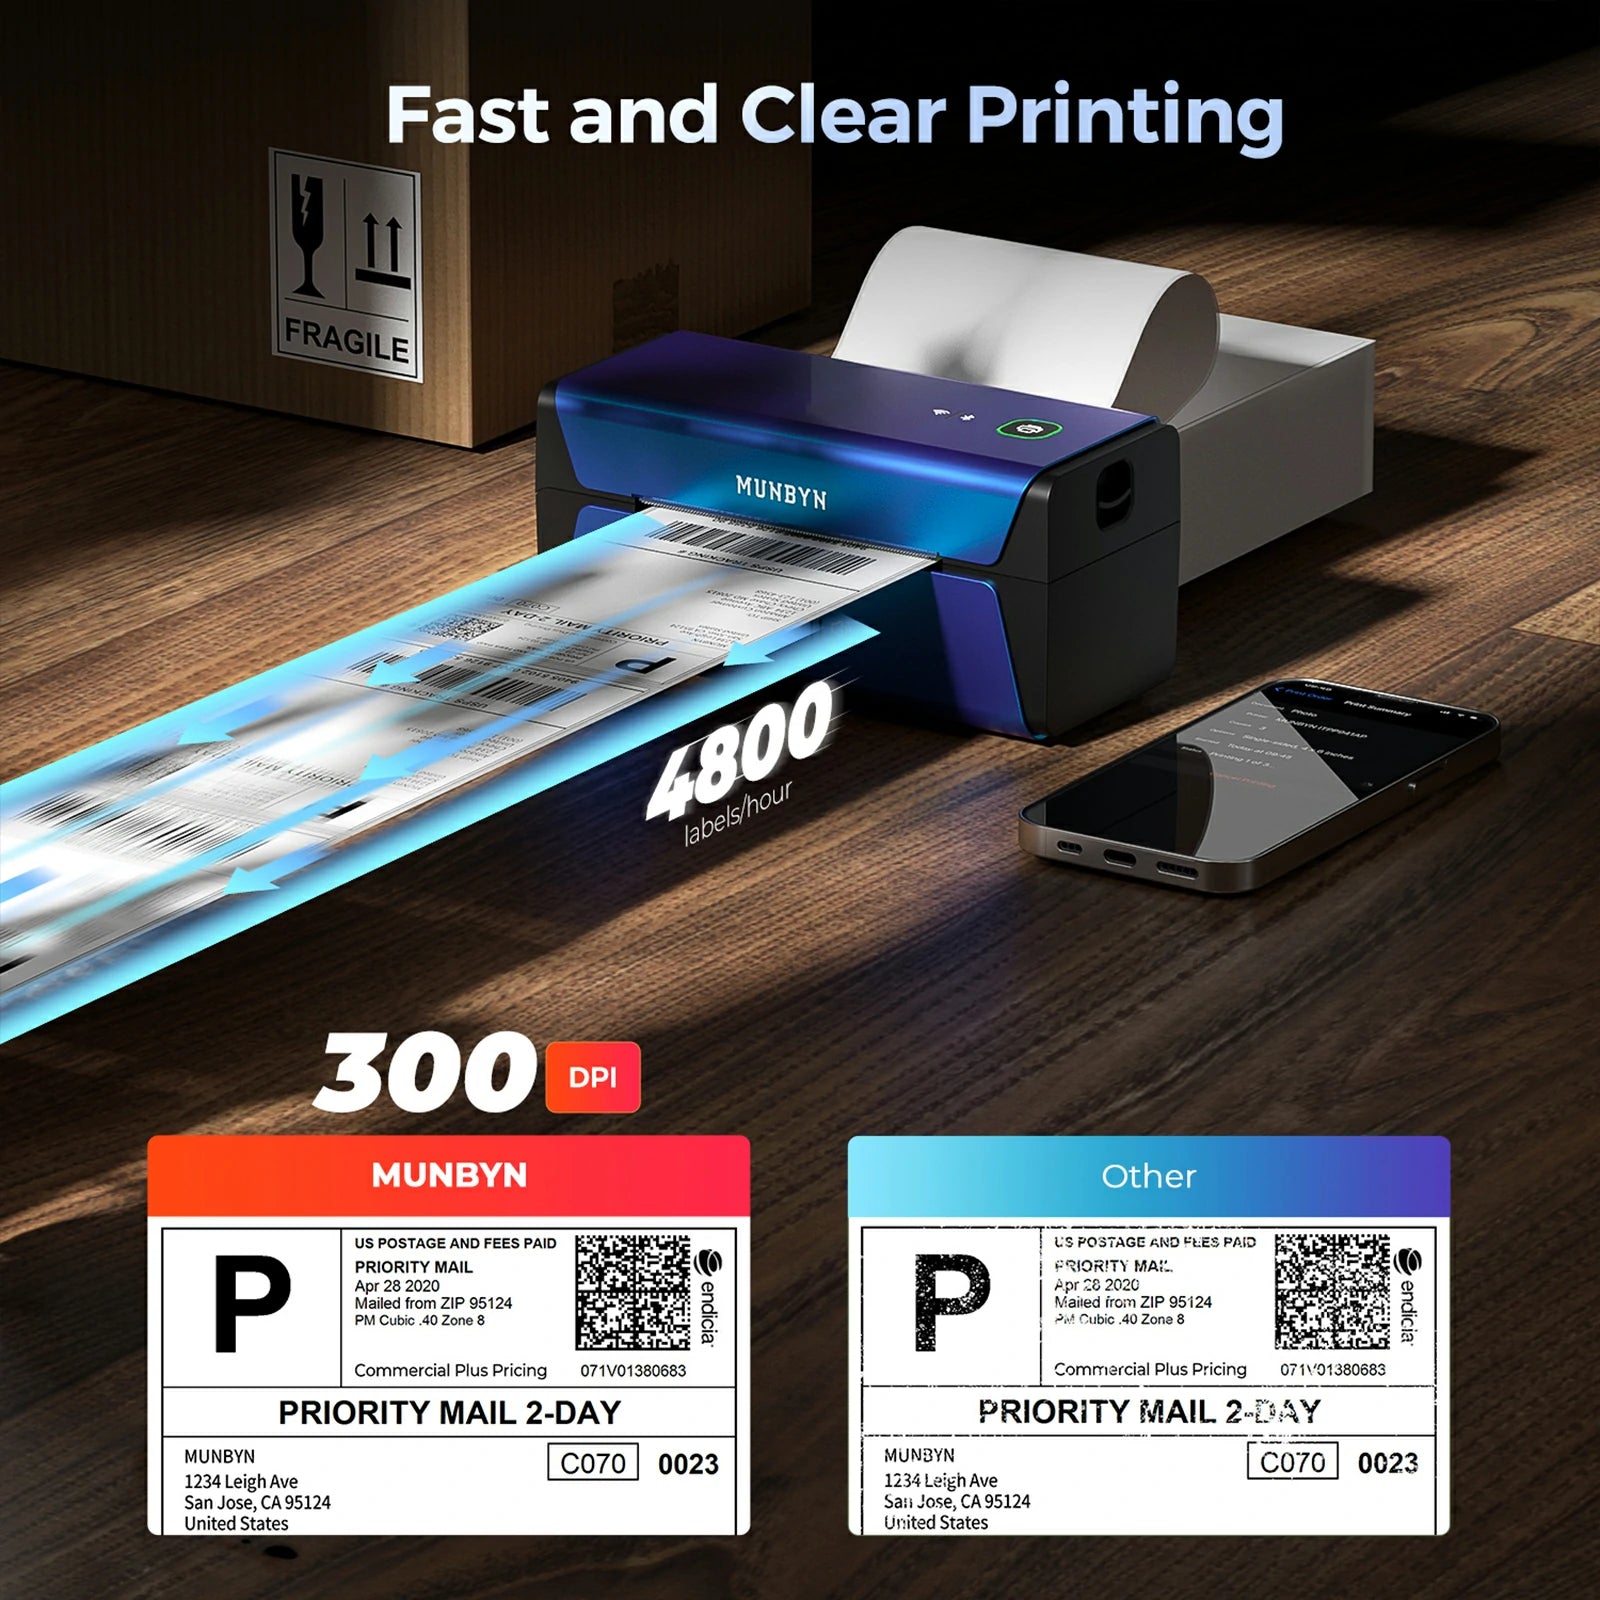 With a resolution of 300 DPI, the printer can produce up to 4800 labels per hour.